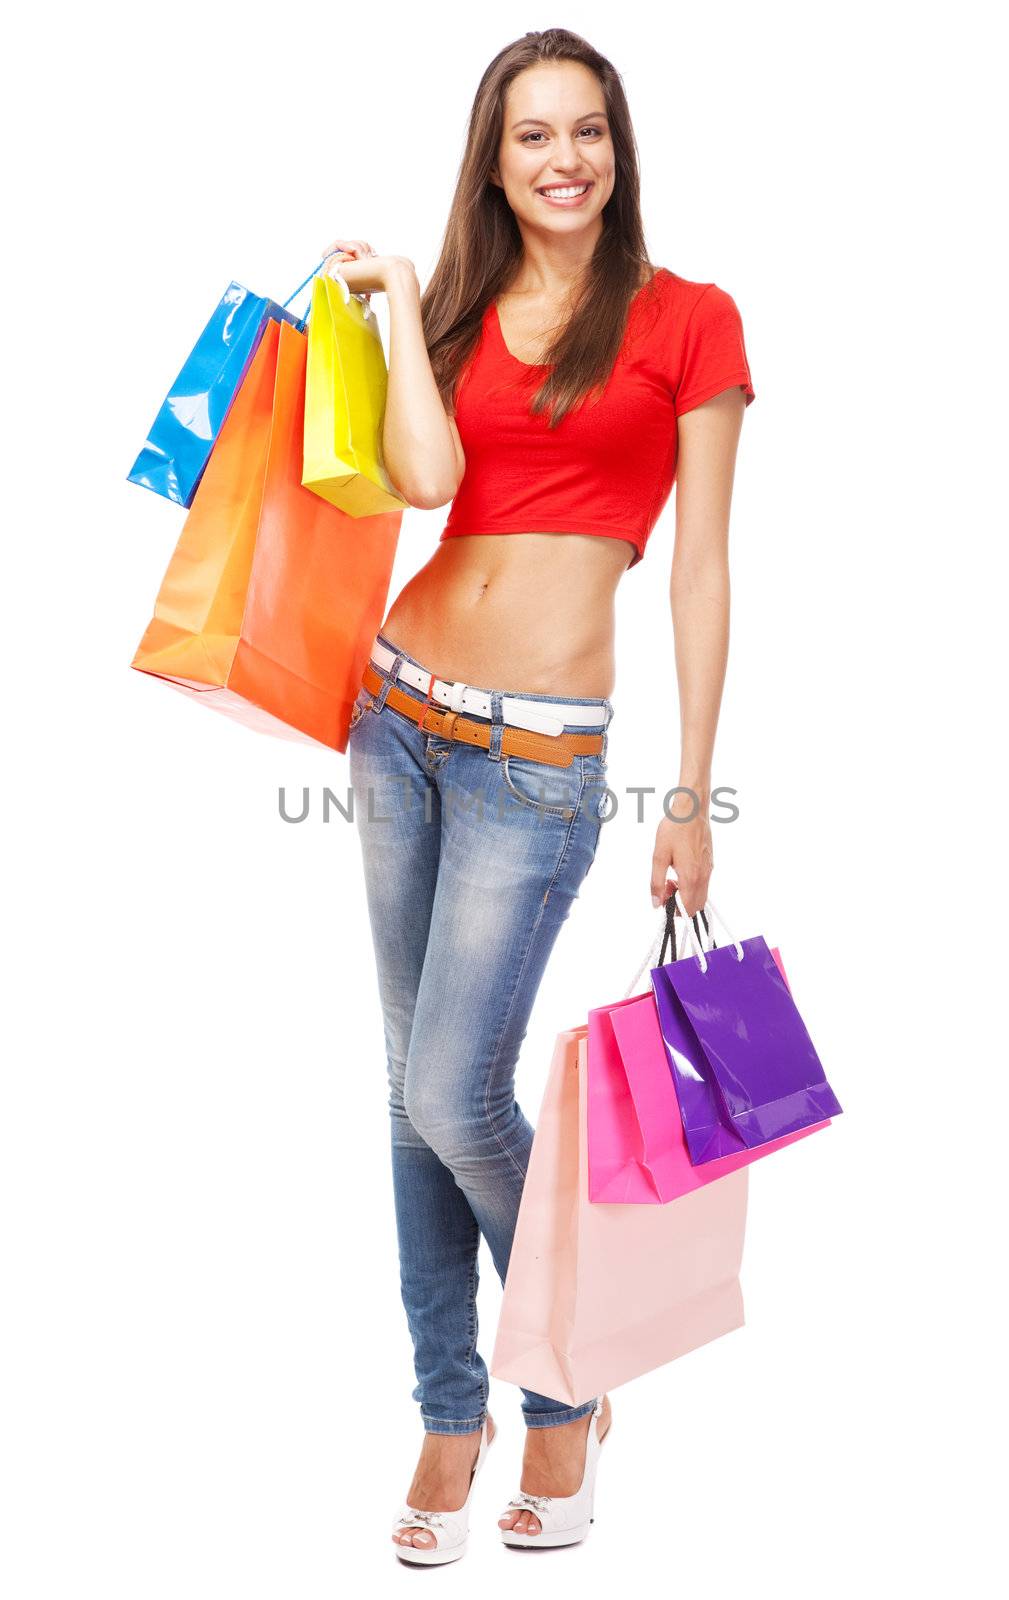 Beautiful lady with shopping bags, isolated on white background